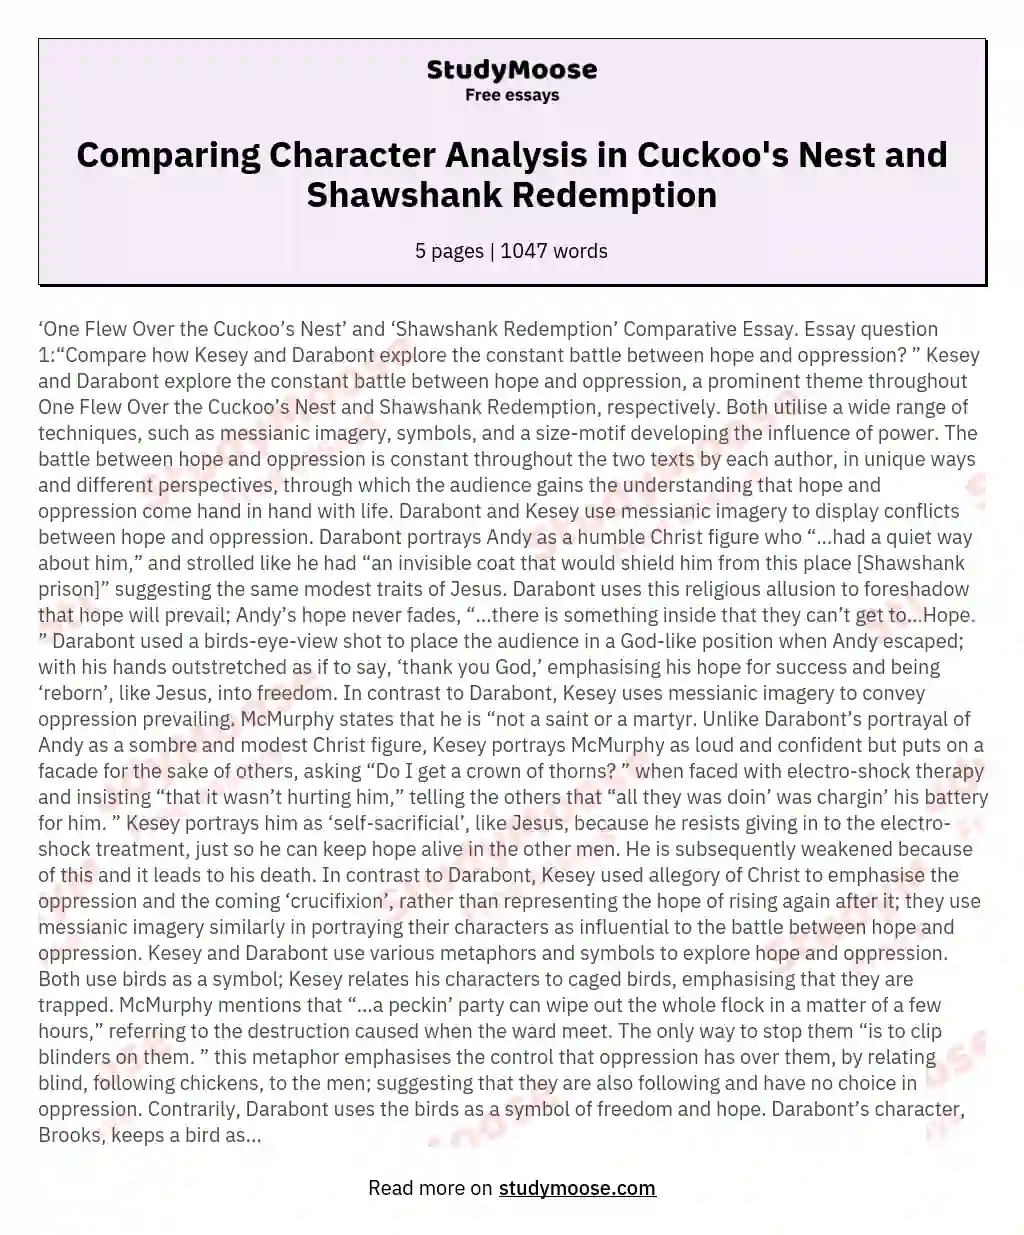 Comparing Character Analysis in Cuckoo's Nest and Shawshank Redemption